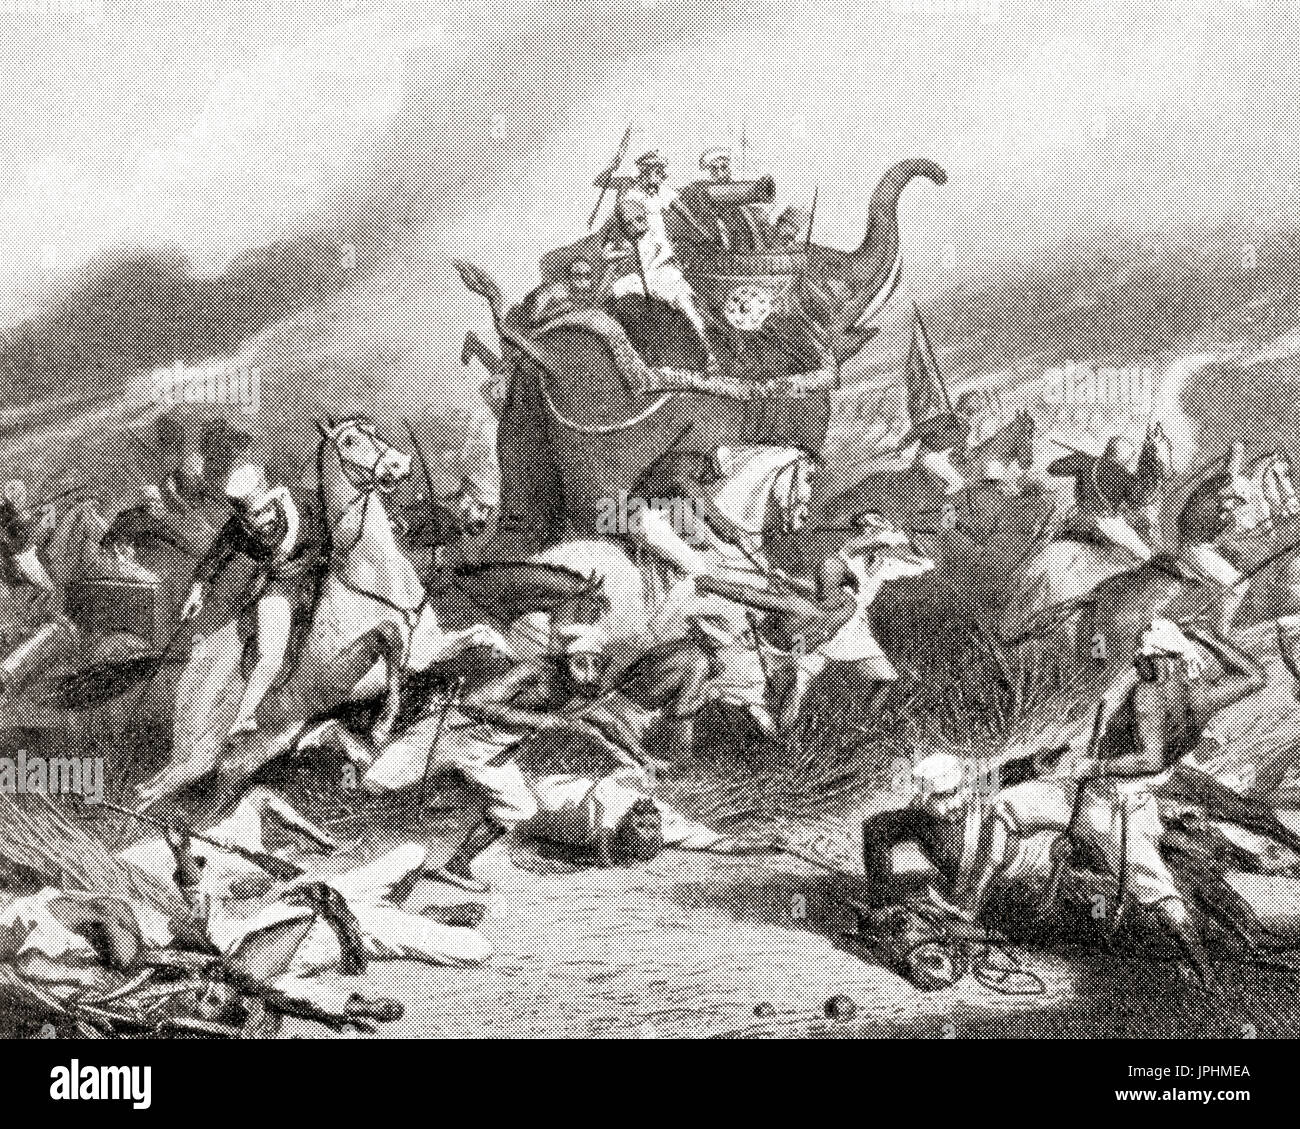 The defeat of Tantya Tope by the British at Jhansi, India during the Indian Rebellion of 1857.   From Hutchinson's History of the Nations, published 1915. Stock Photo